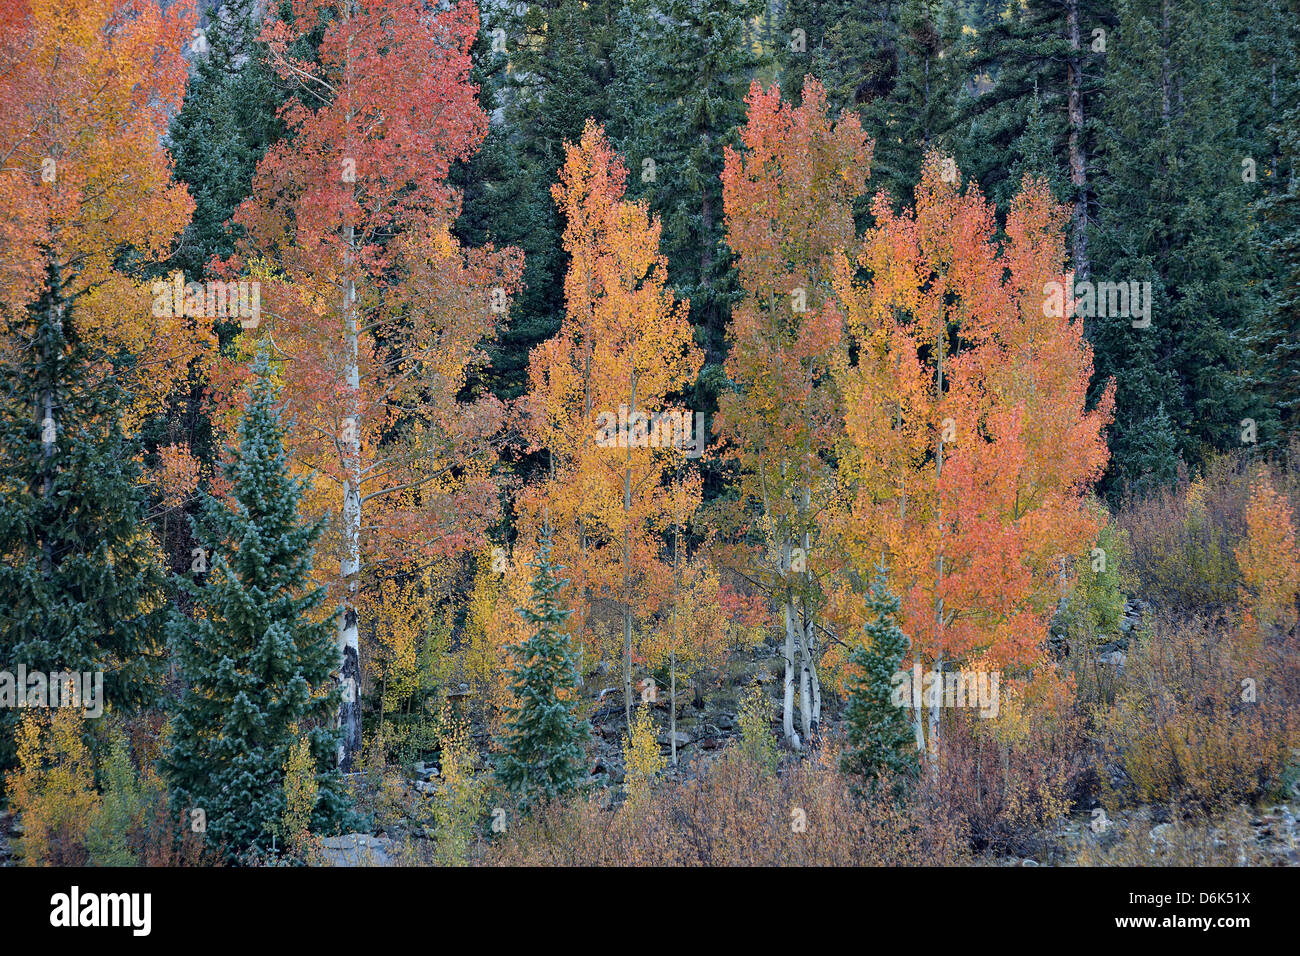 Orange aspens in the fall, San Juan National Forest, Colorado, United States of America, North America Stock Photo